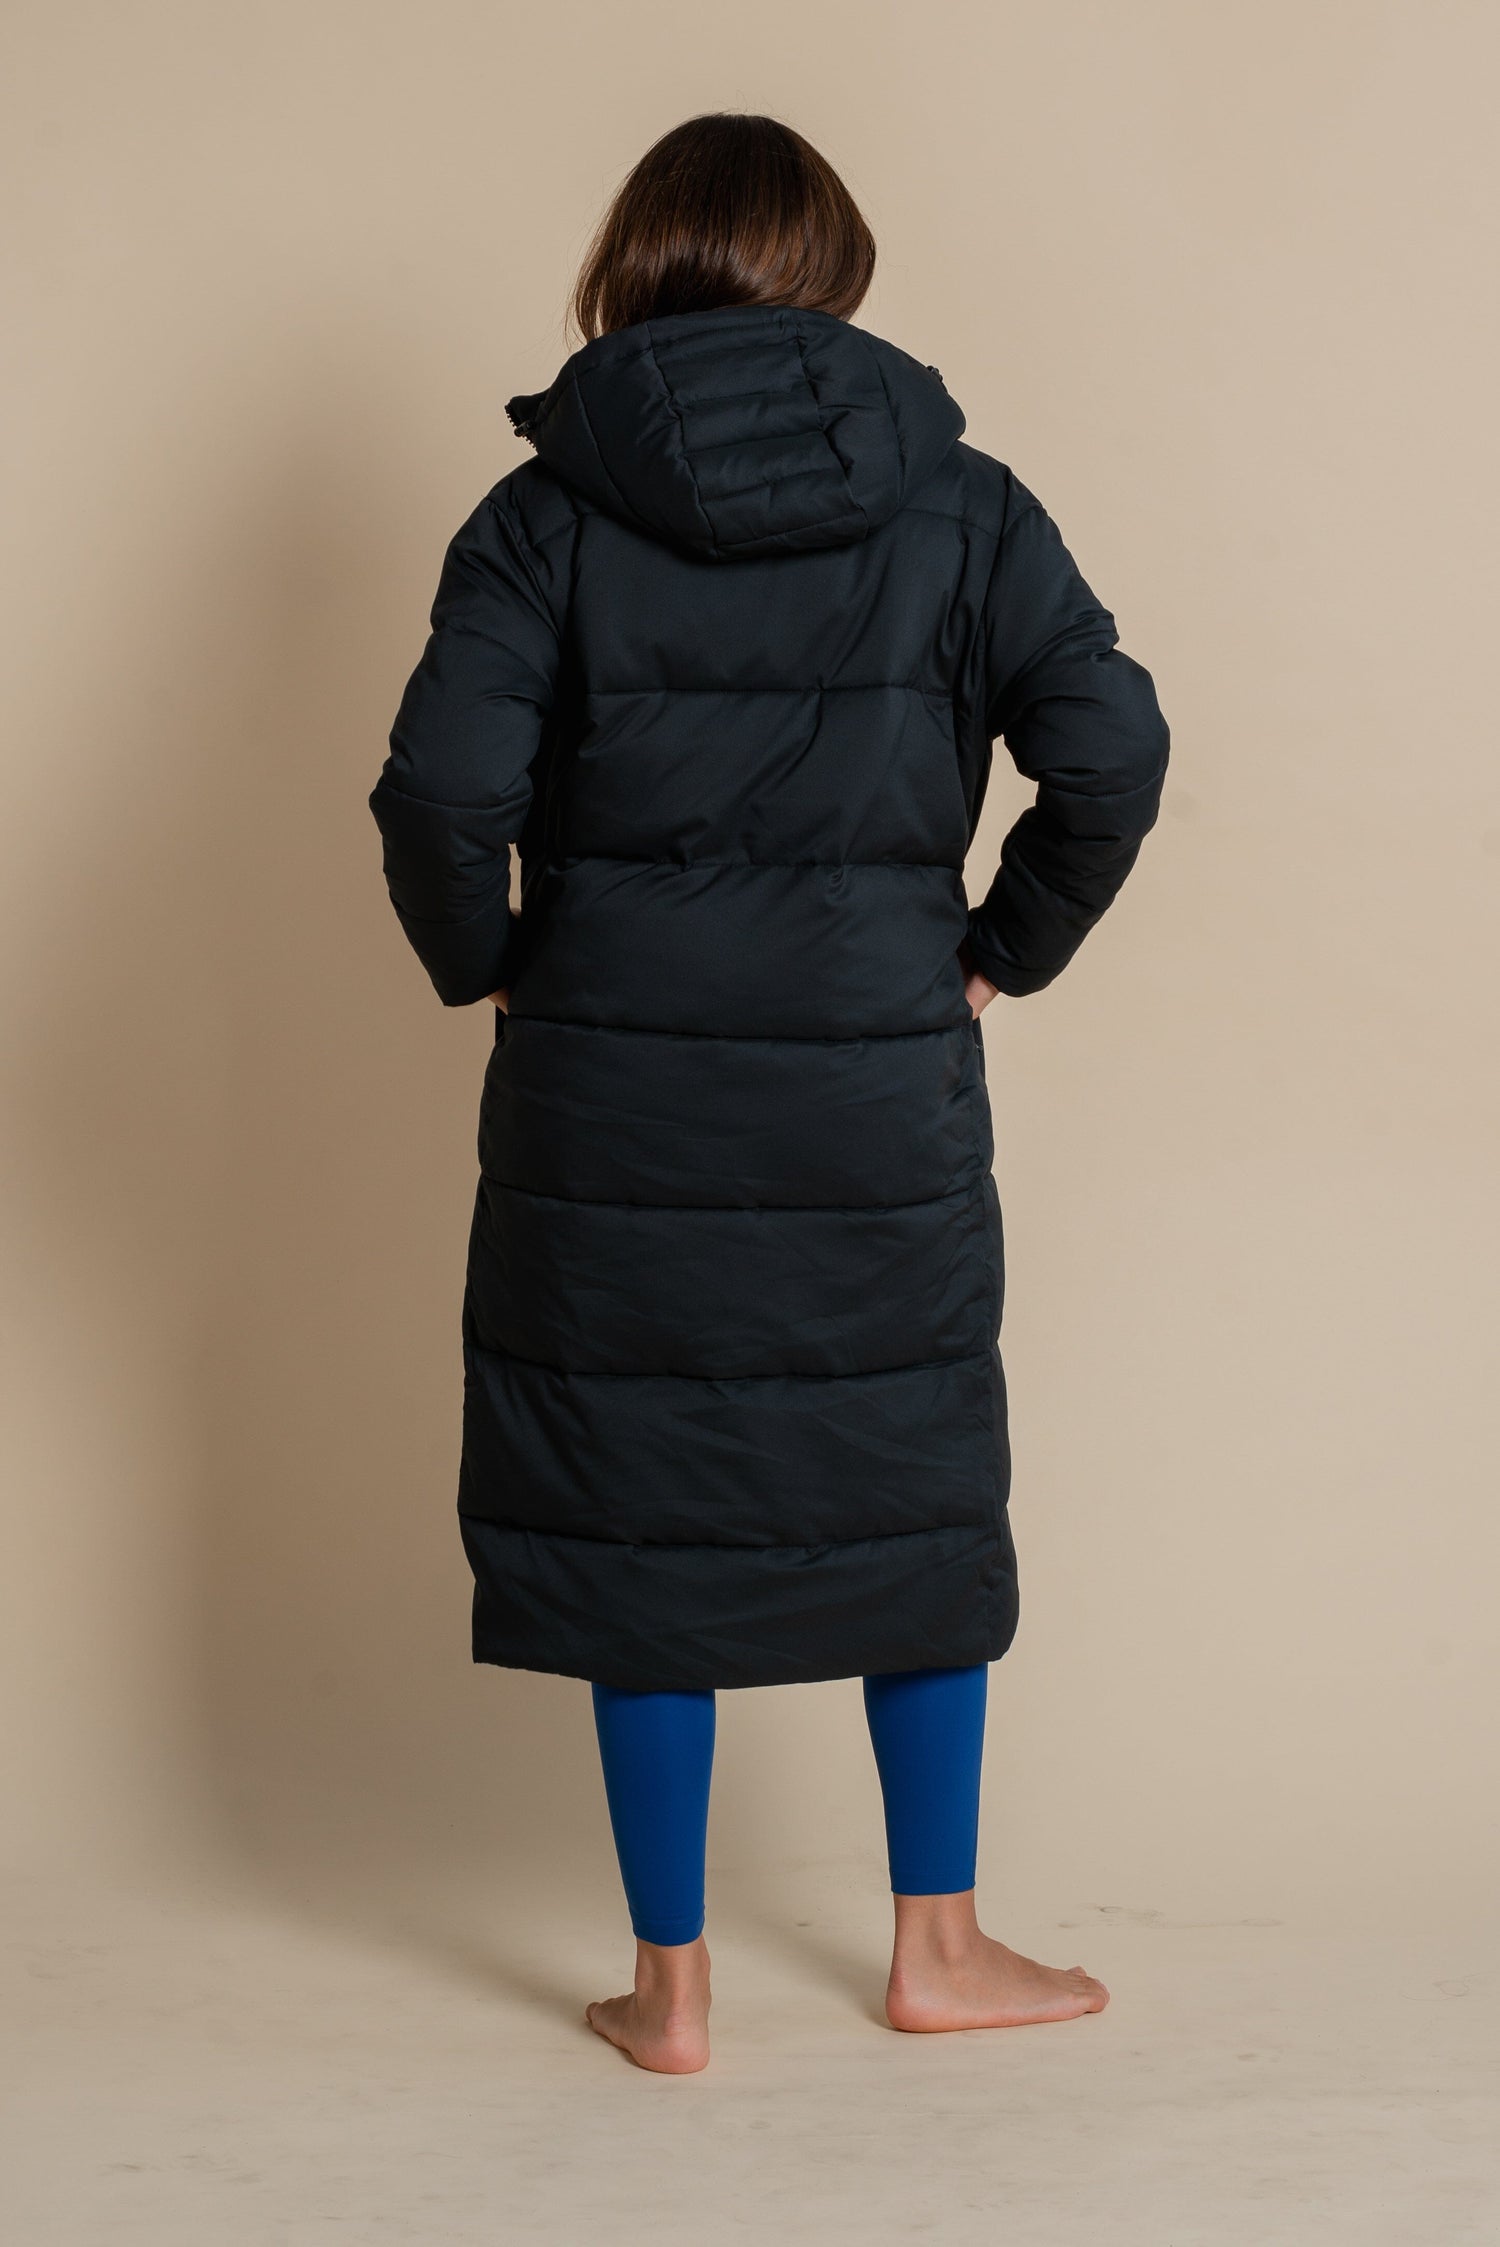 Girlfriend Collective W's Long Puffer Jacket - Recycled PET Black Jacket